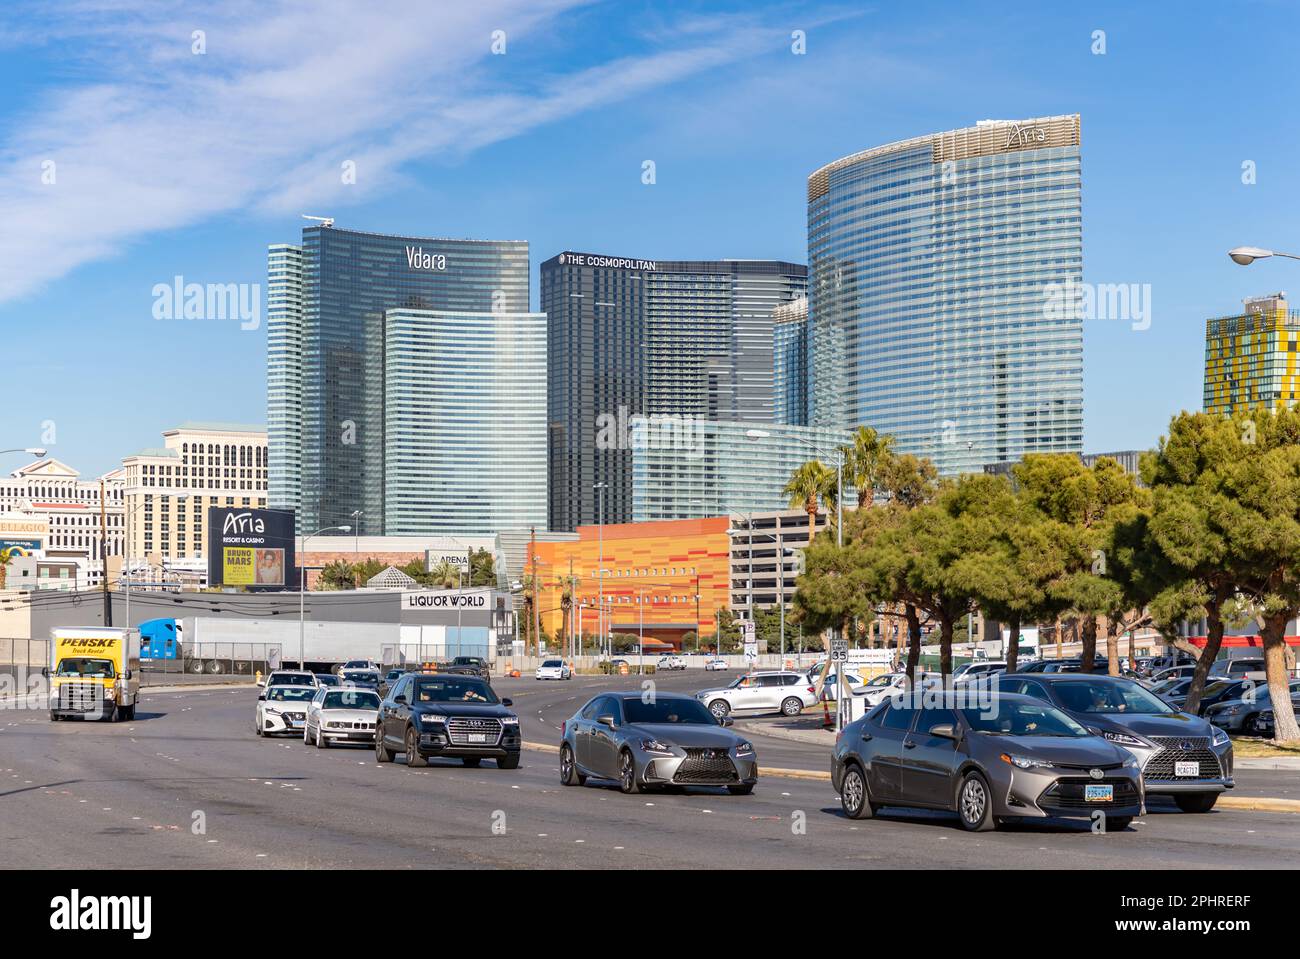 A picture of the Dean Martin Drive, with the Vdara Hotel and Spa, The Cosmopolitan of Las Vegas and the ARIA Resort and Casino seen at the far back. Stock Photo